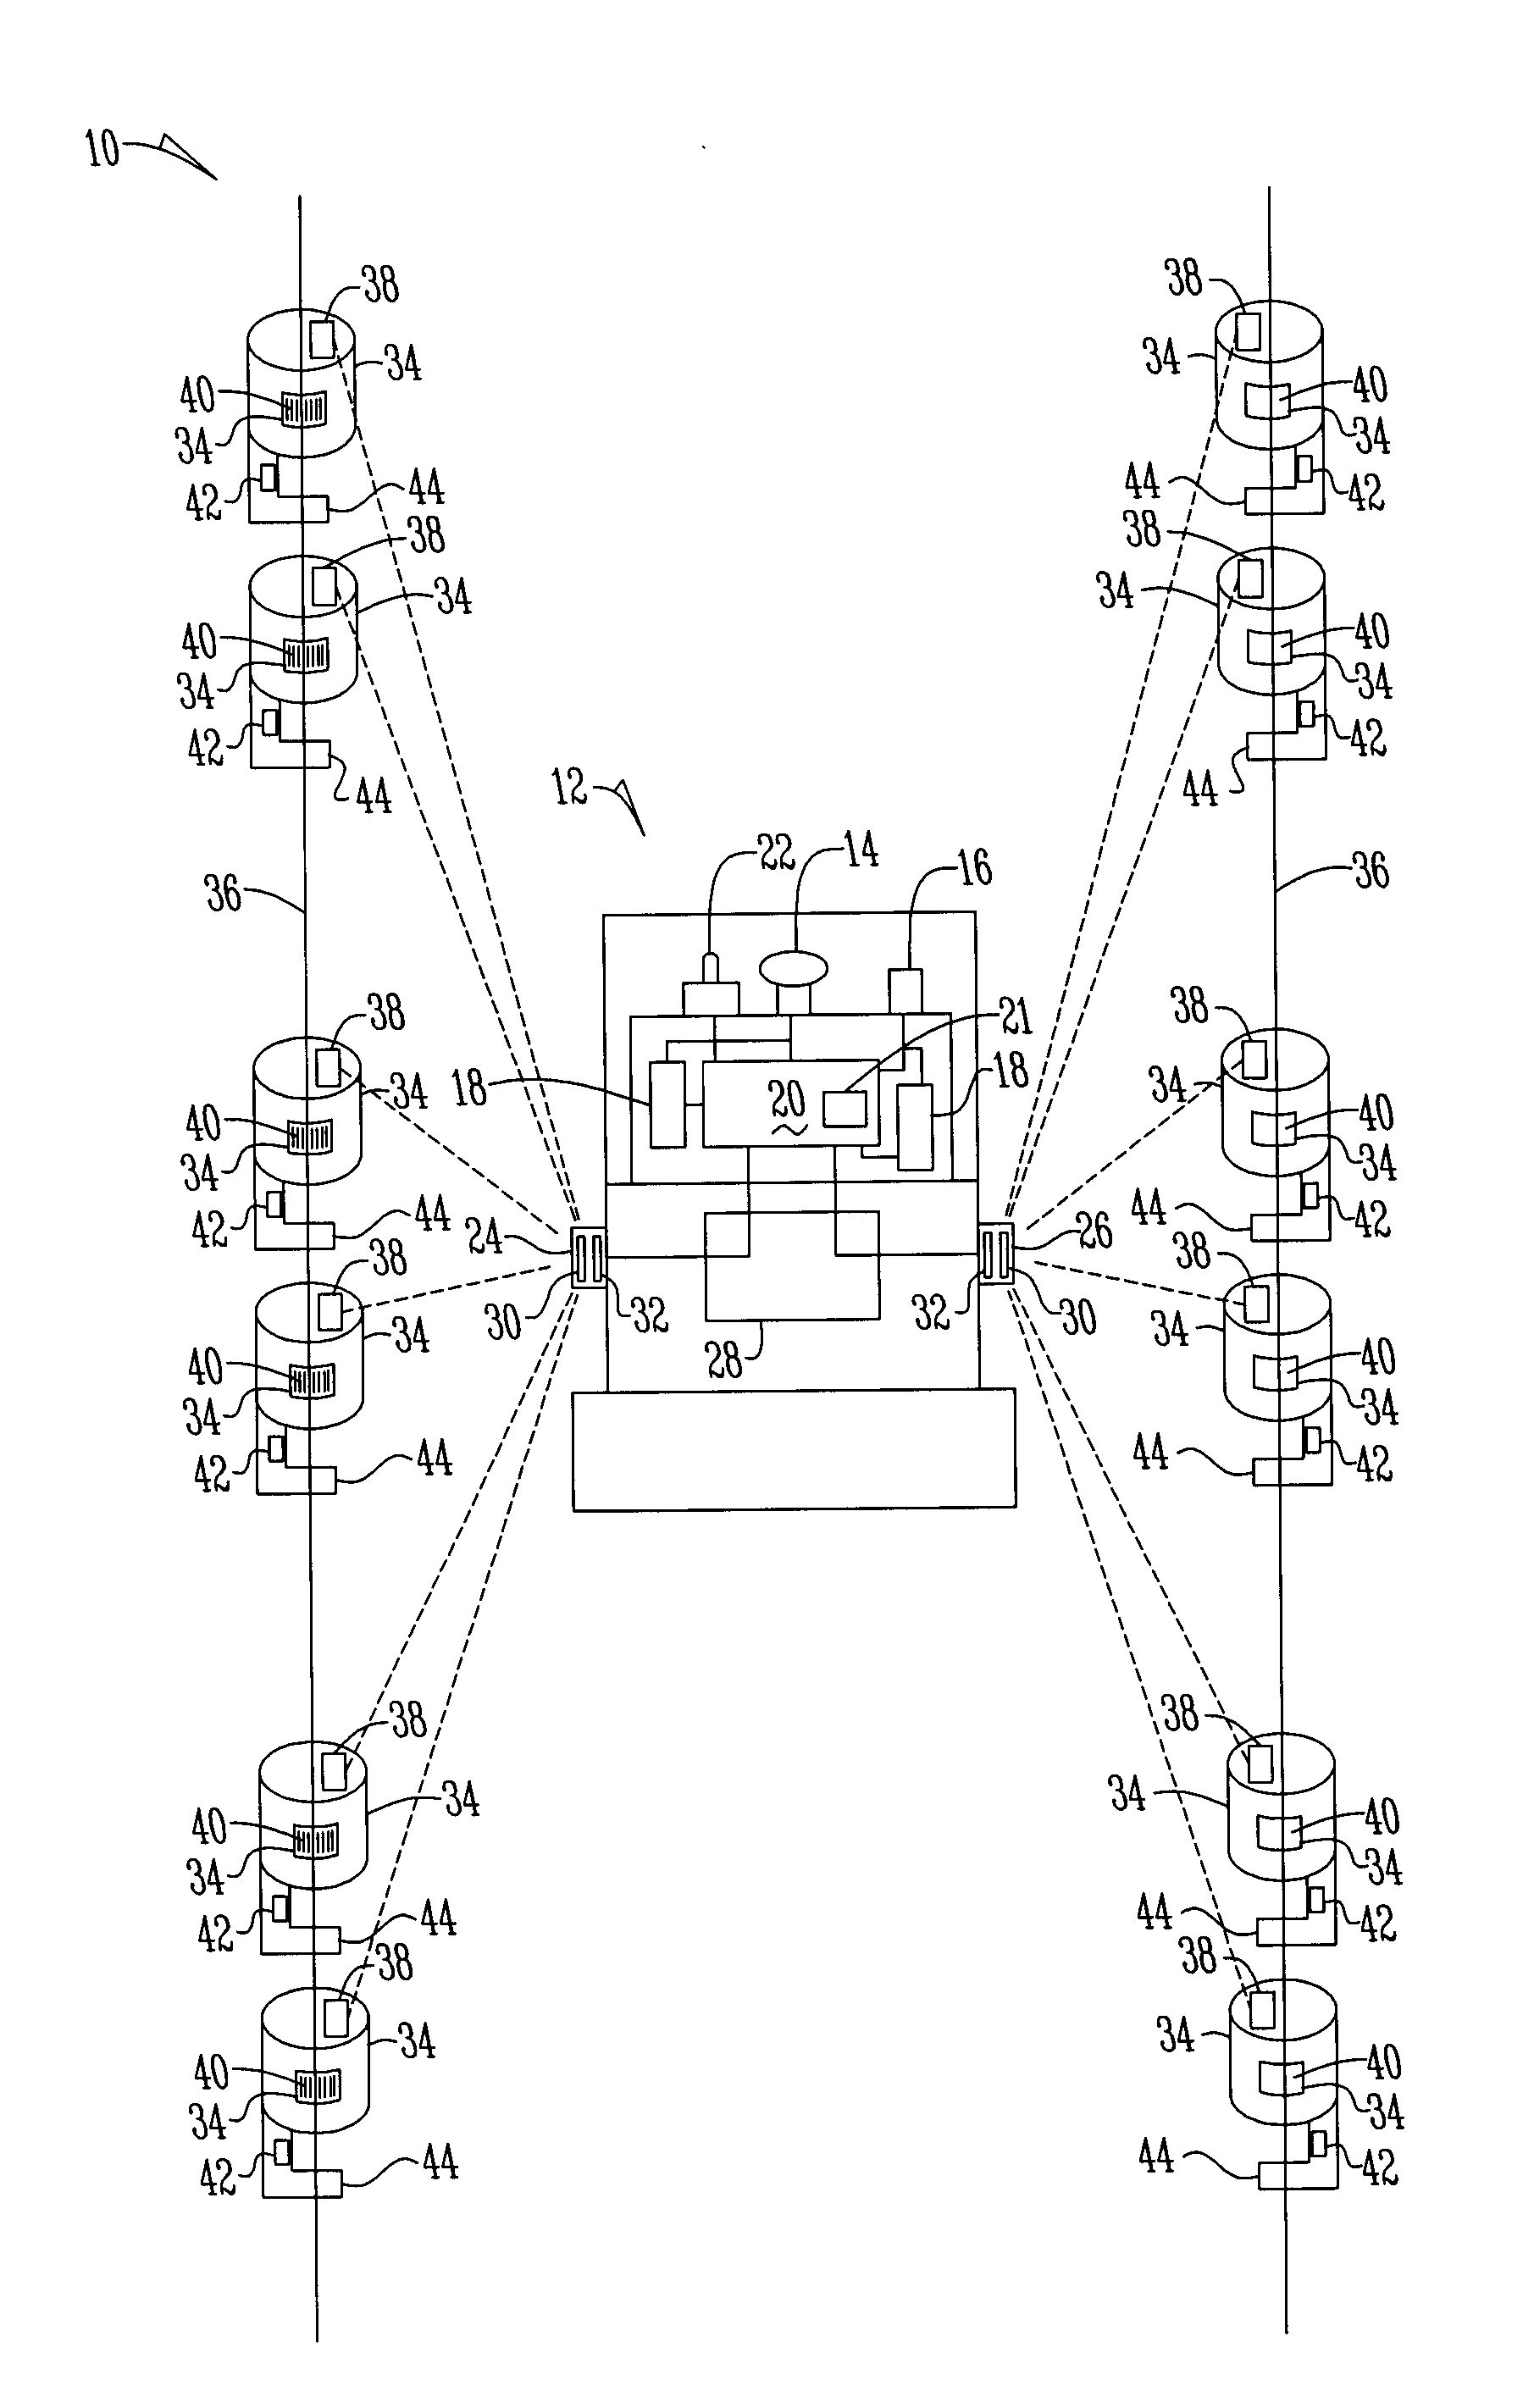 Sensing system for an automated vehicle